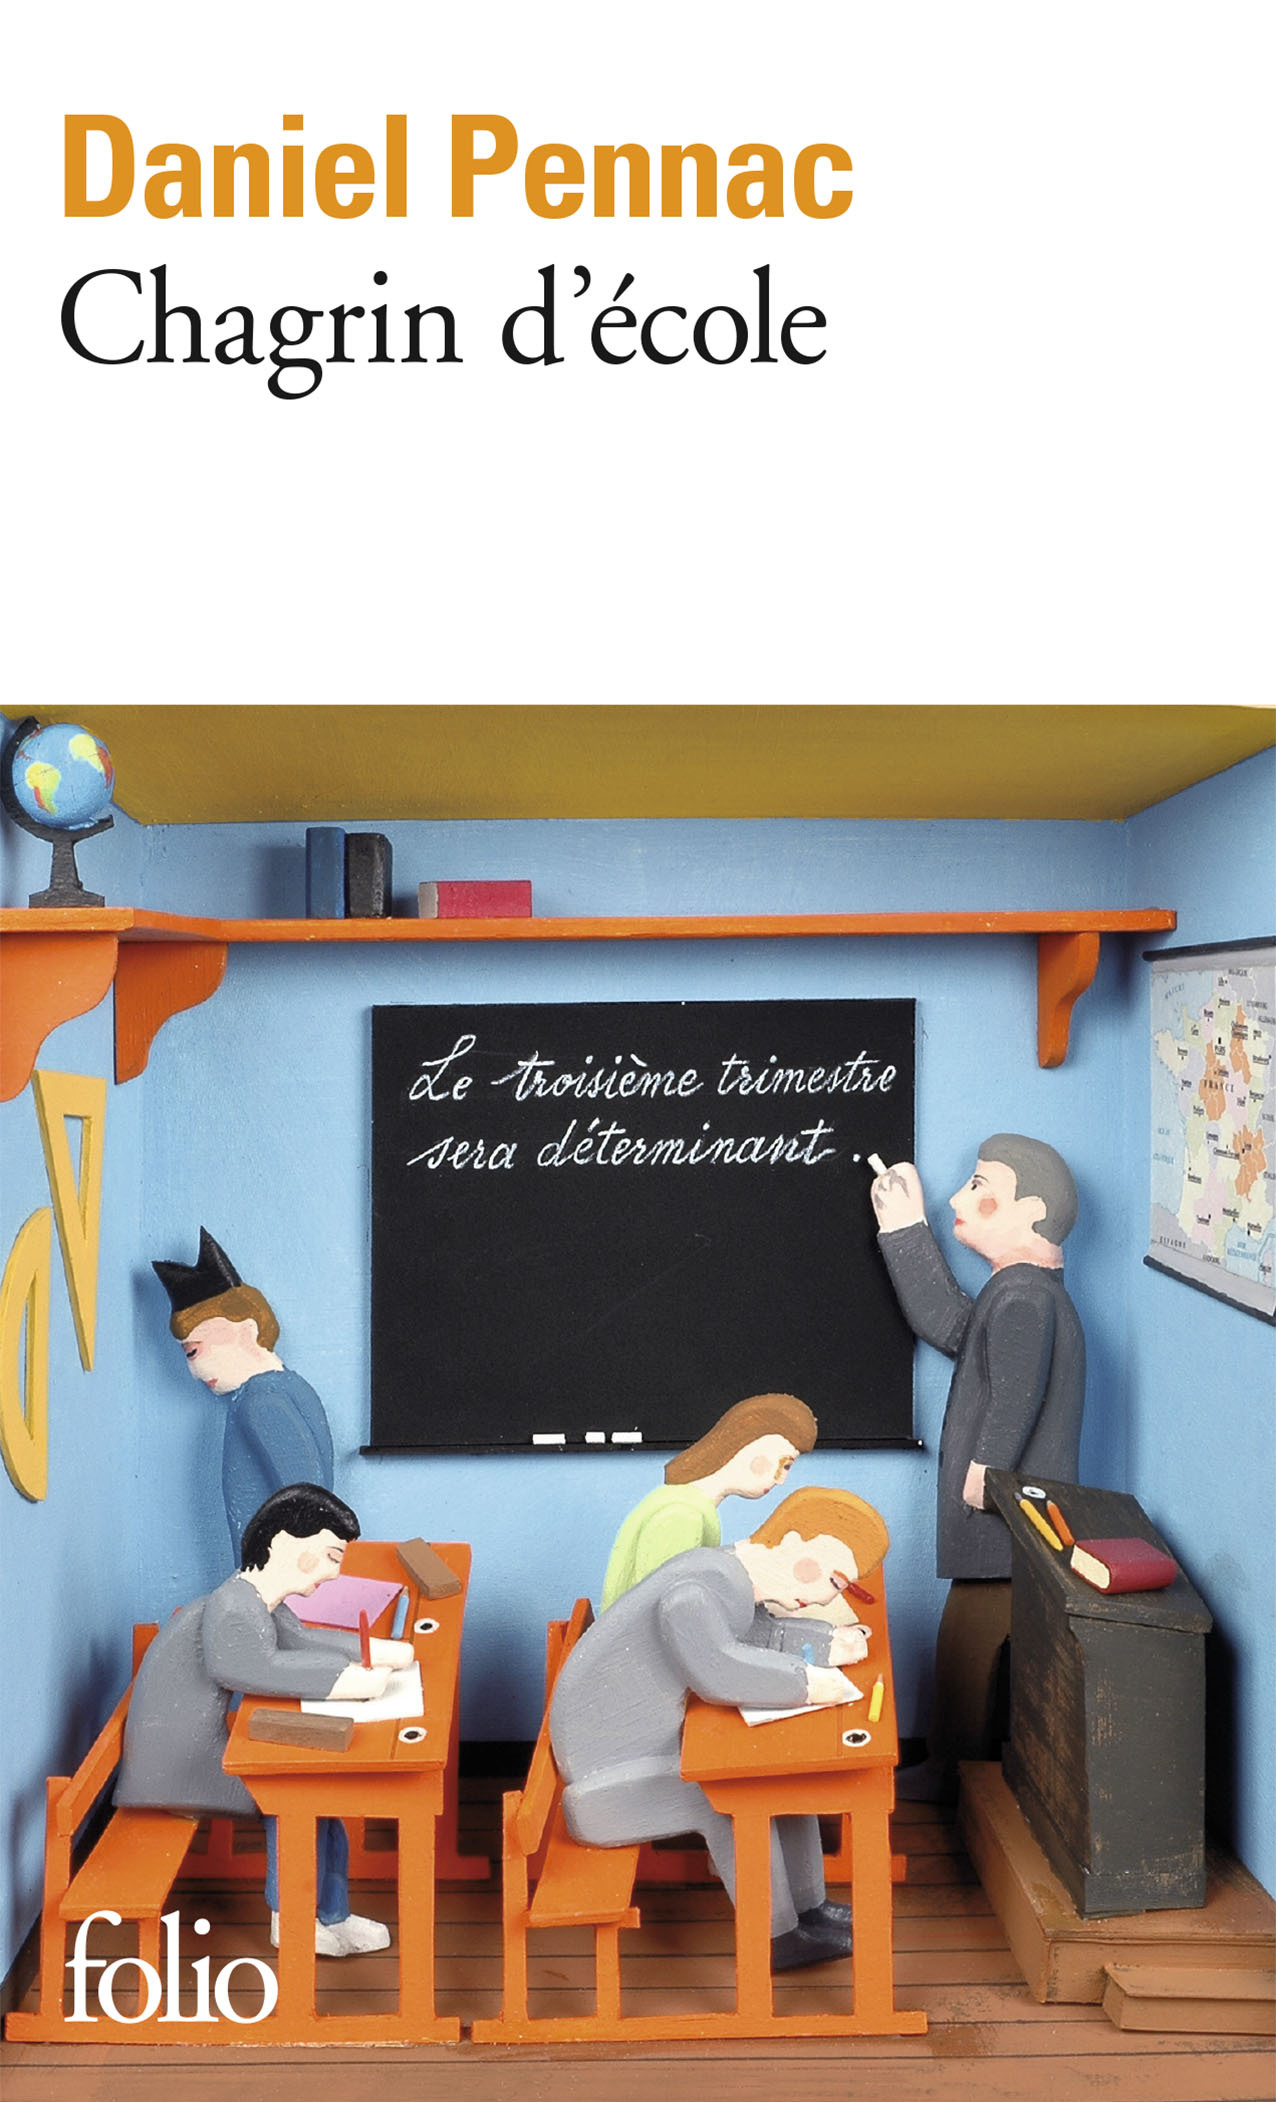 Chagrin d'école (9782070396849-front-cover)